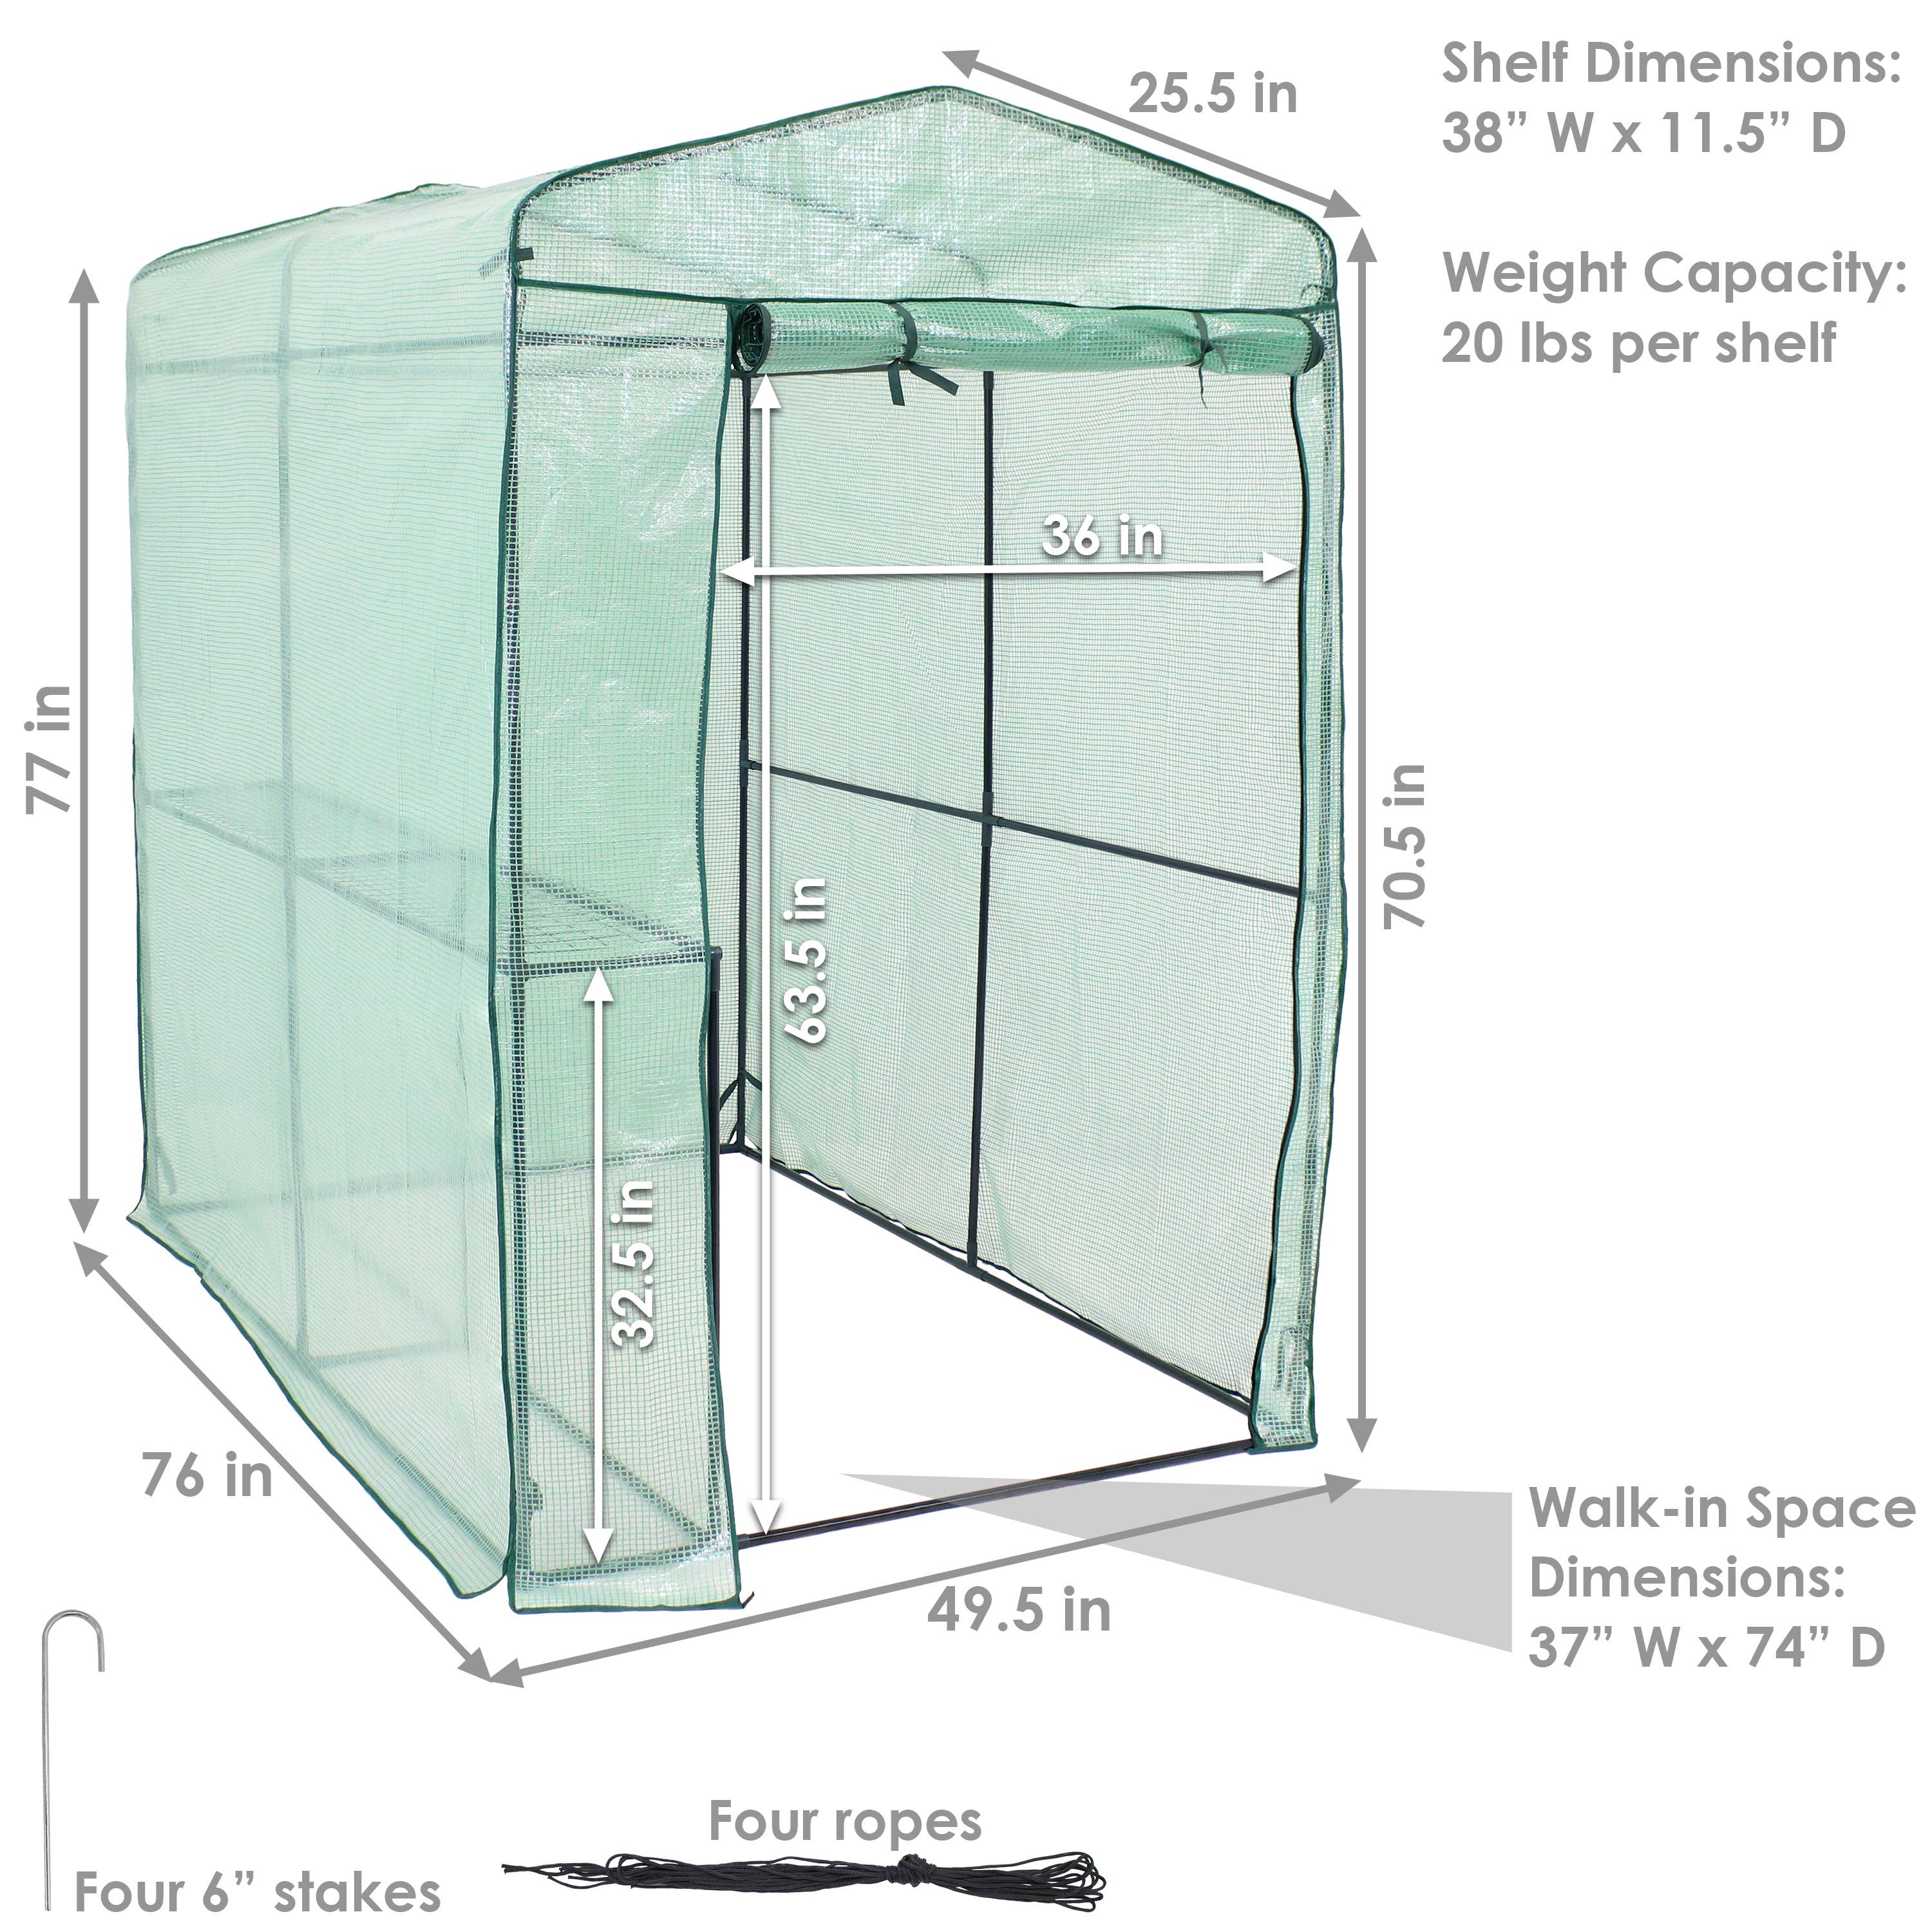 Deluxe Walk-In Greenhouse with 1 Shelf for Outdoors - Green